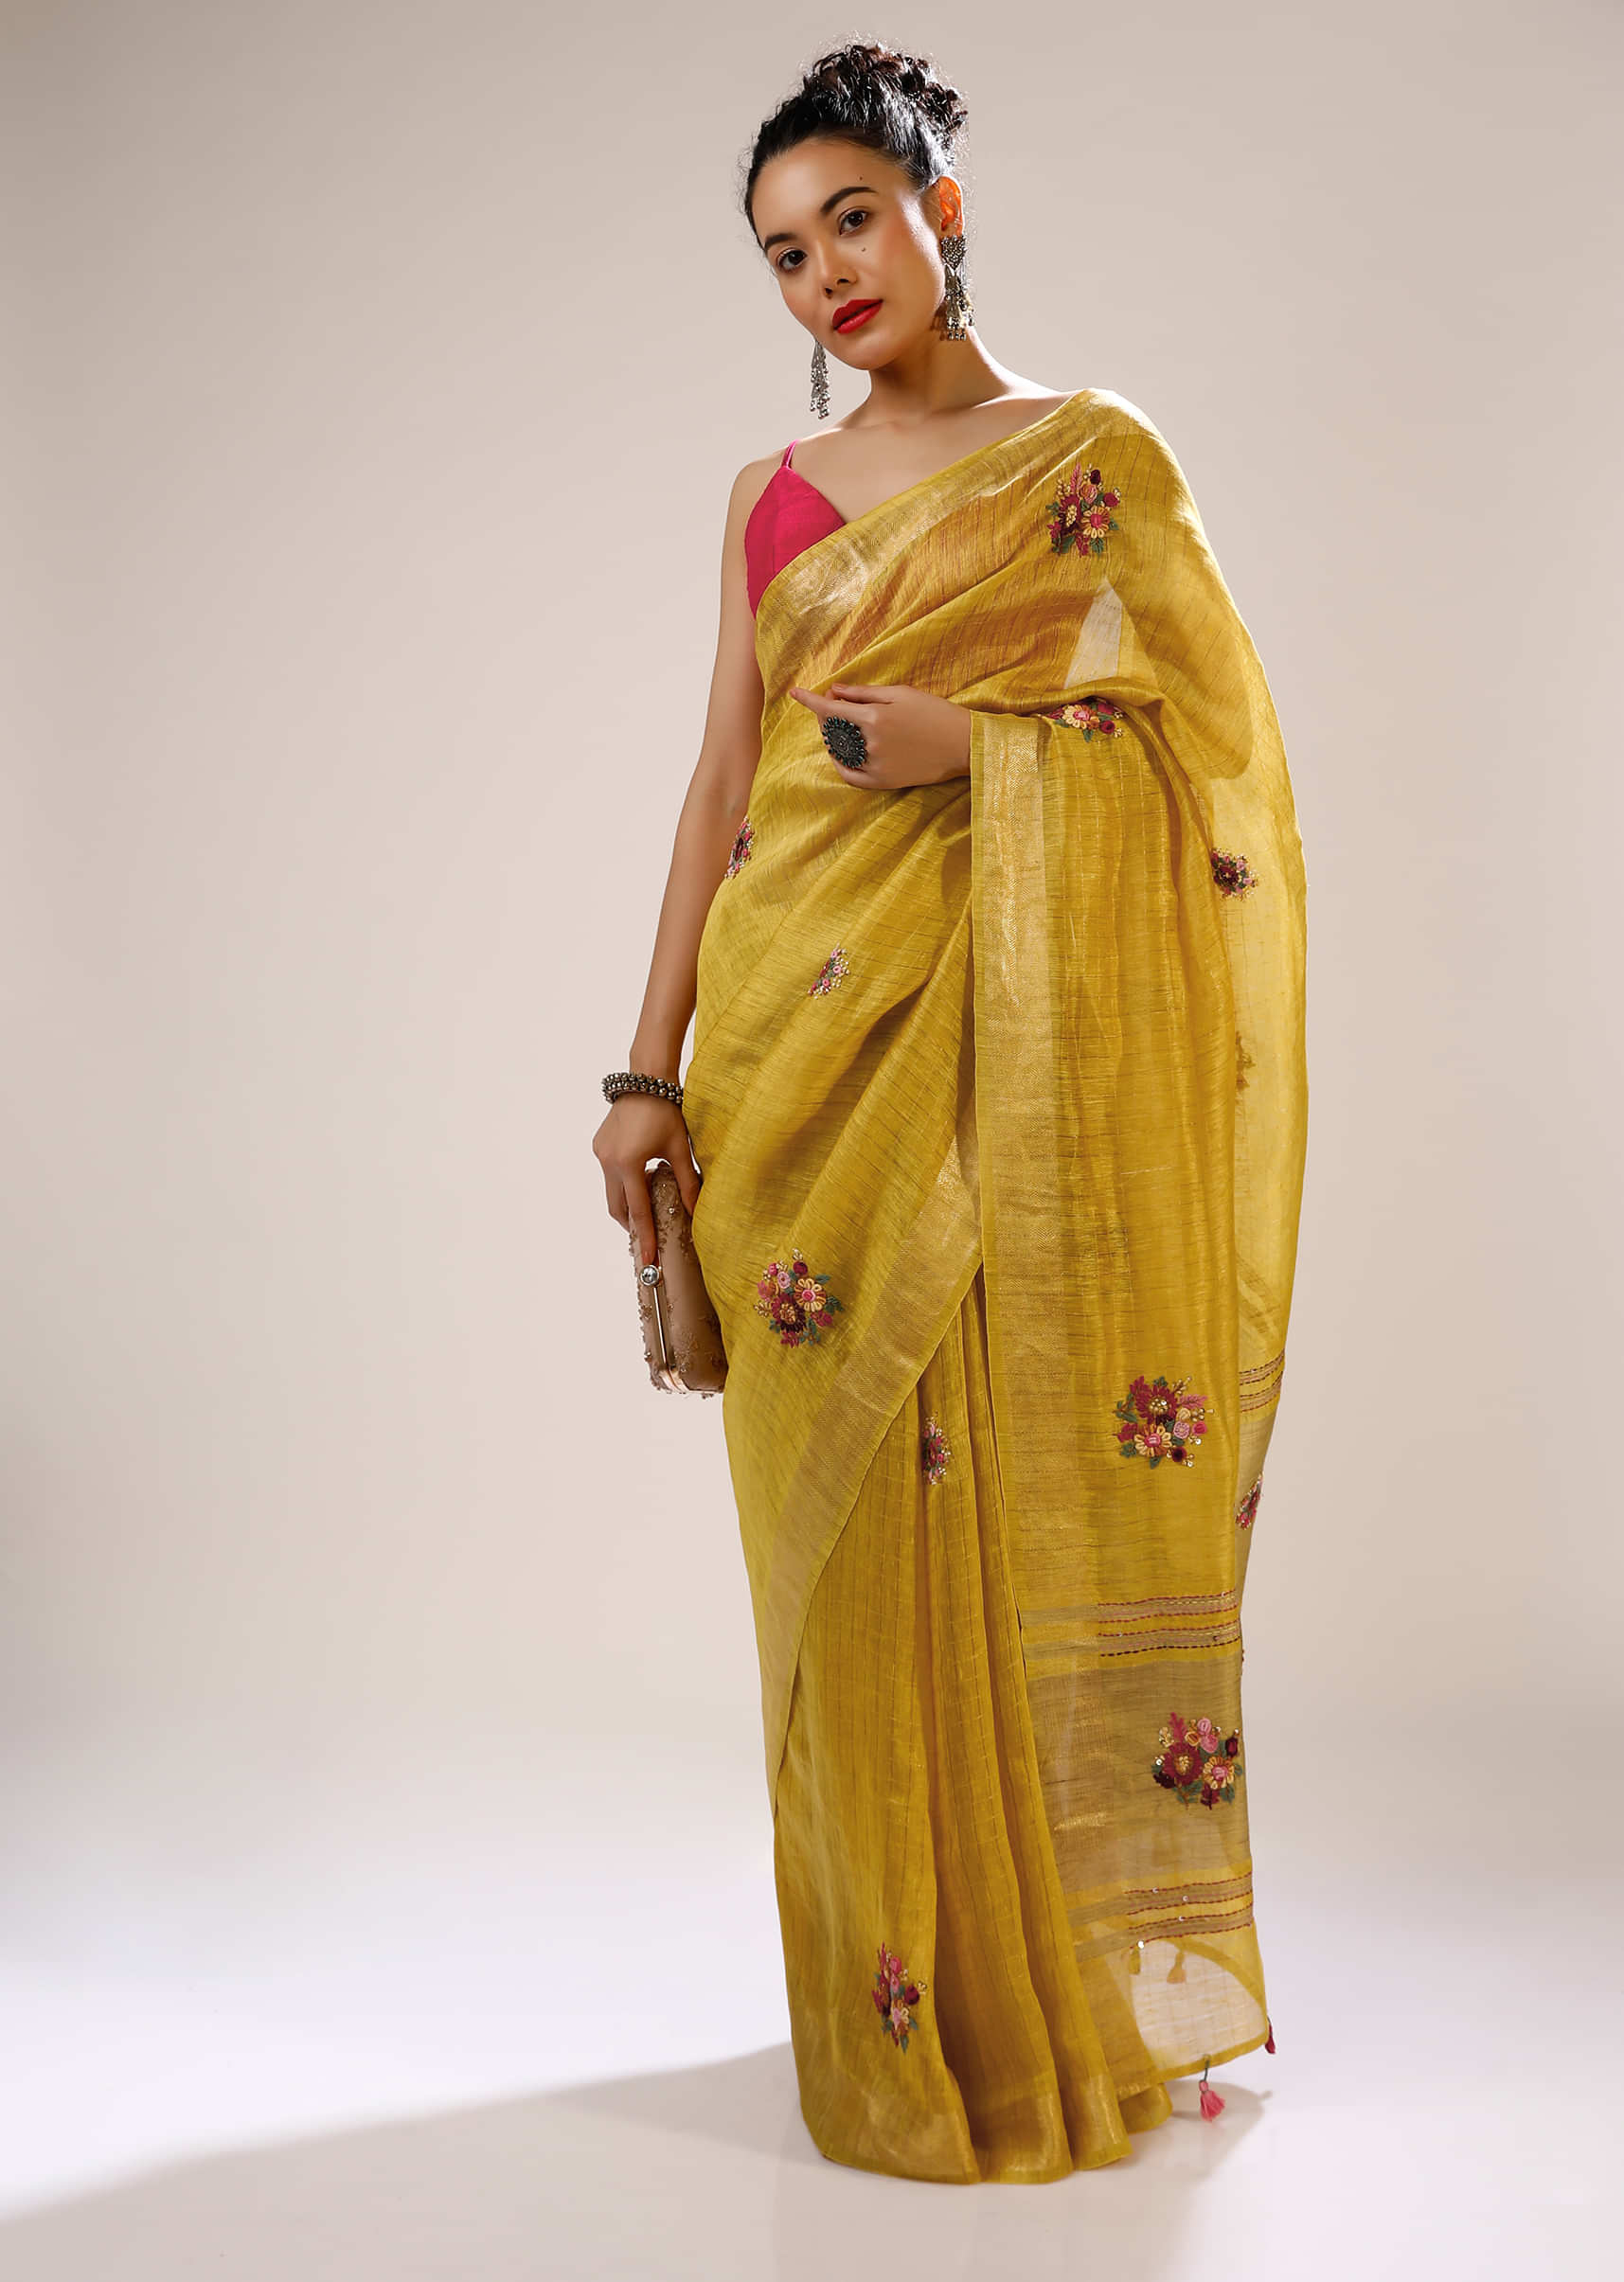 Ceylon Yellow Saree In Tussar Silk With Bud Hand Embroidered Floral Motifs In Repeat Pattern And Running Stitch Embroidery  